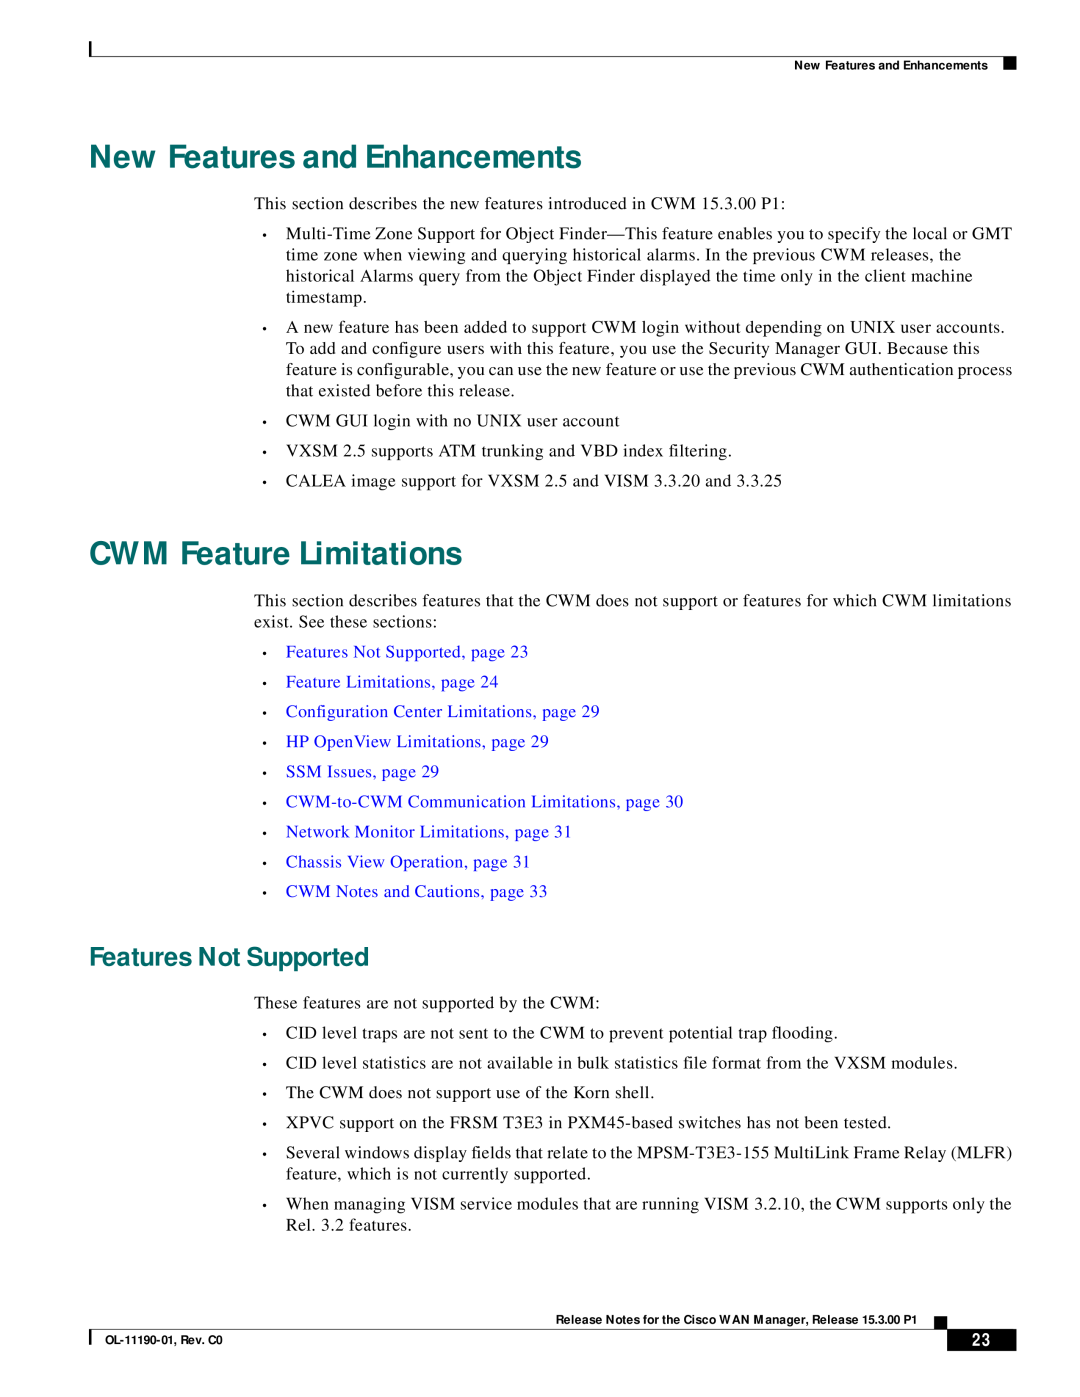 Cisco Systems 15.3.00P1 manual New Features and Enhancements, CWM Feature Limitations, Features Not Supported 